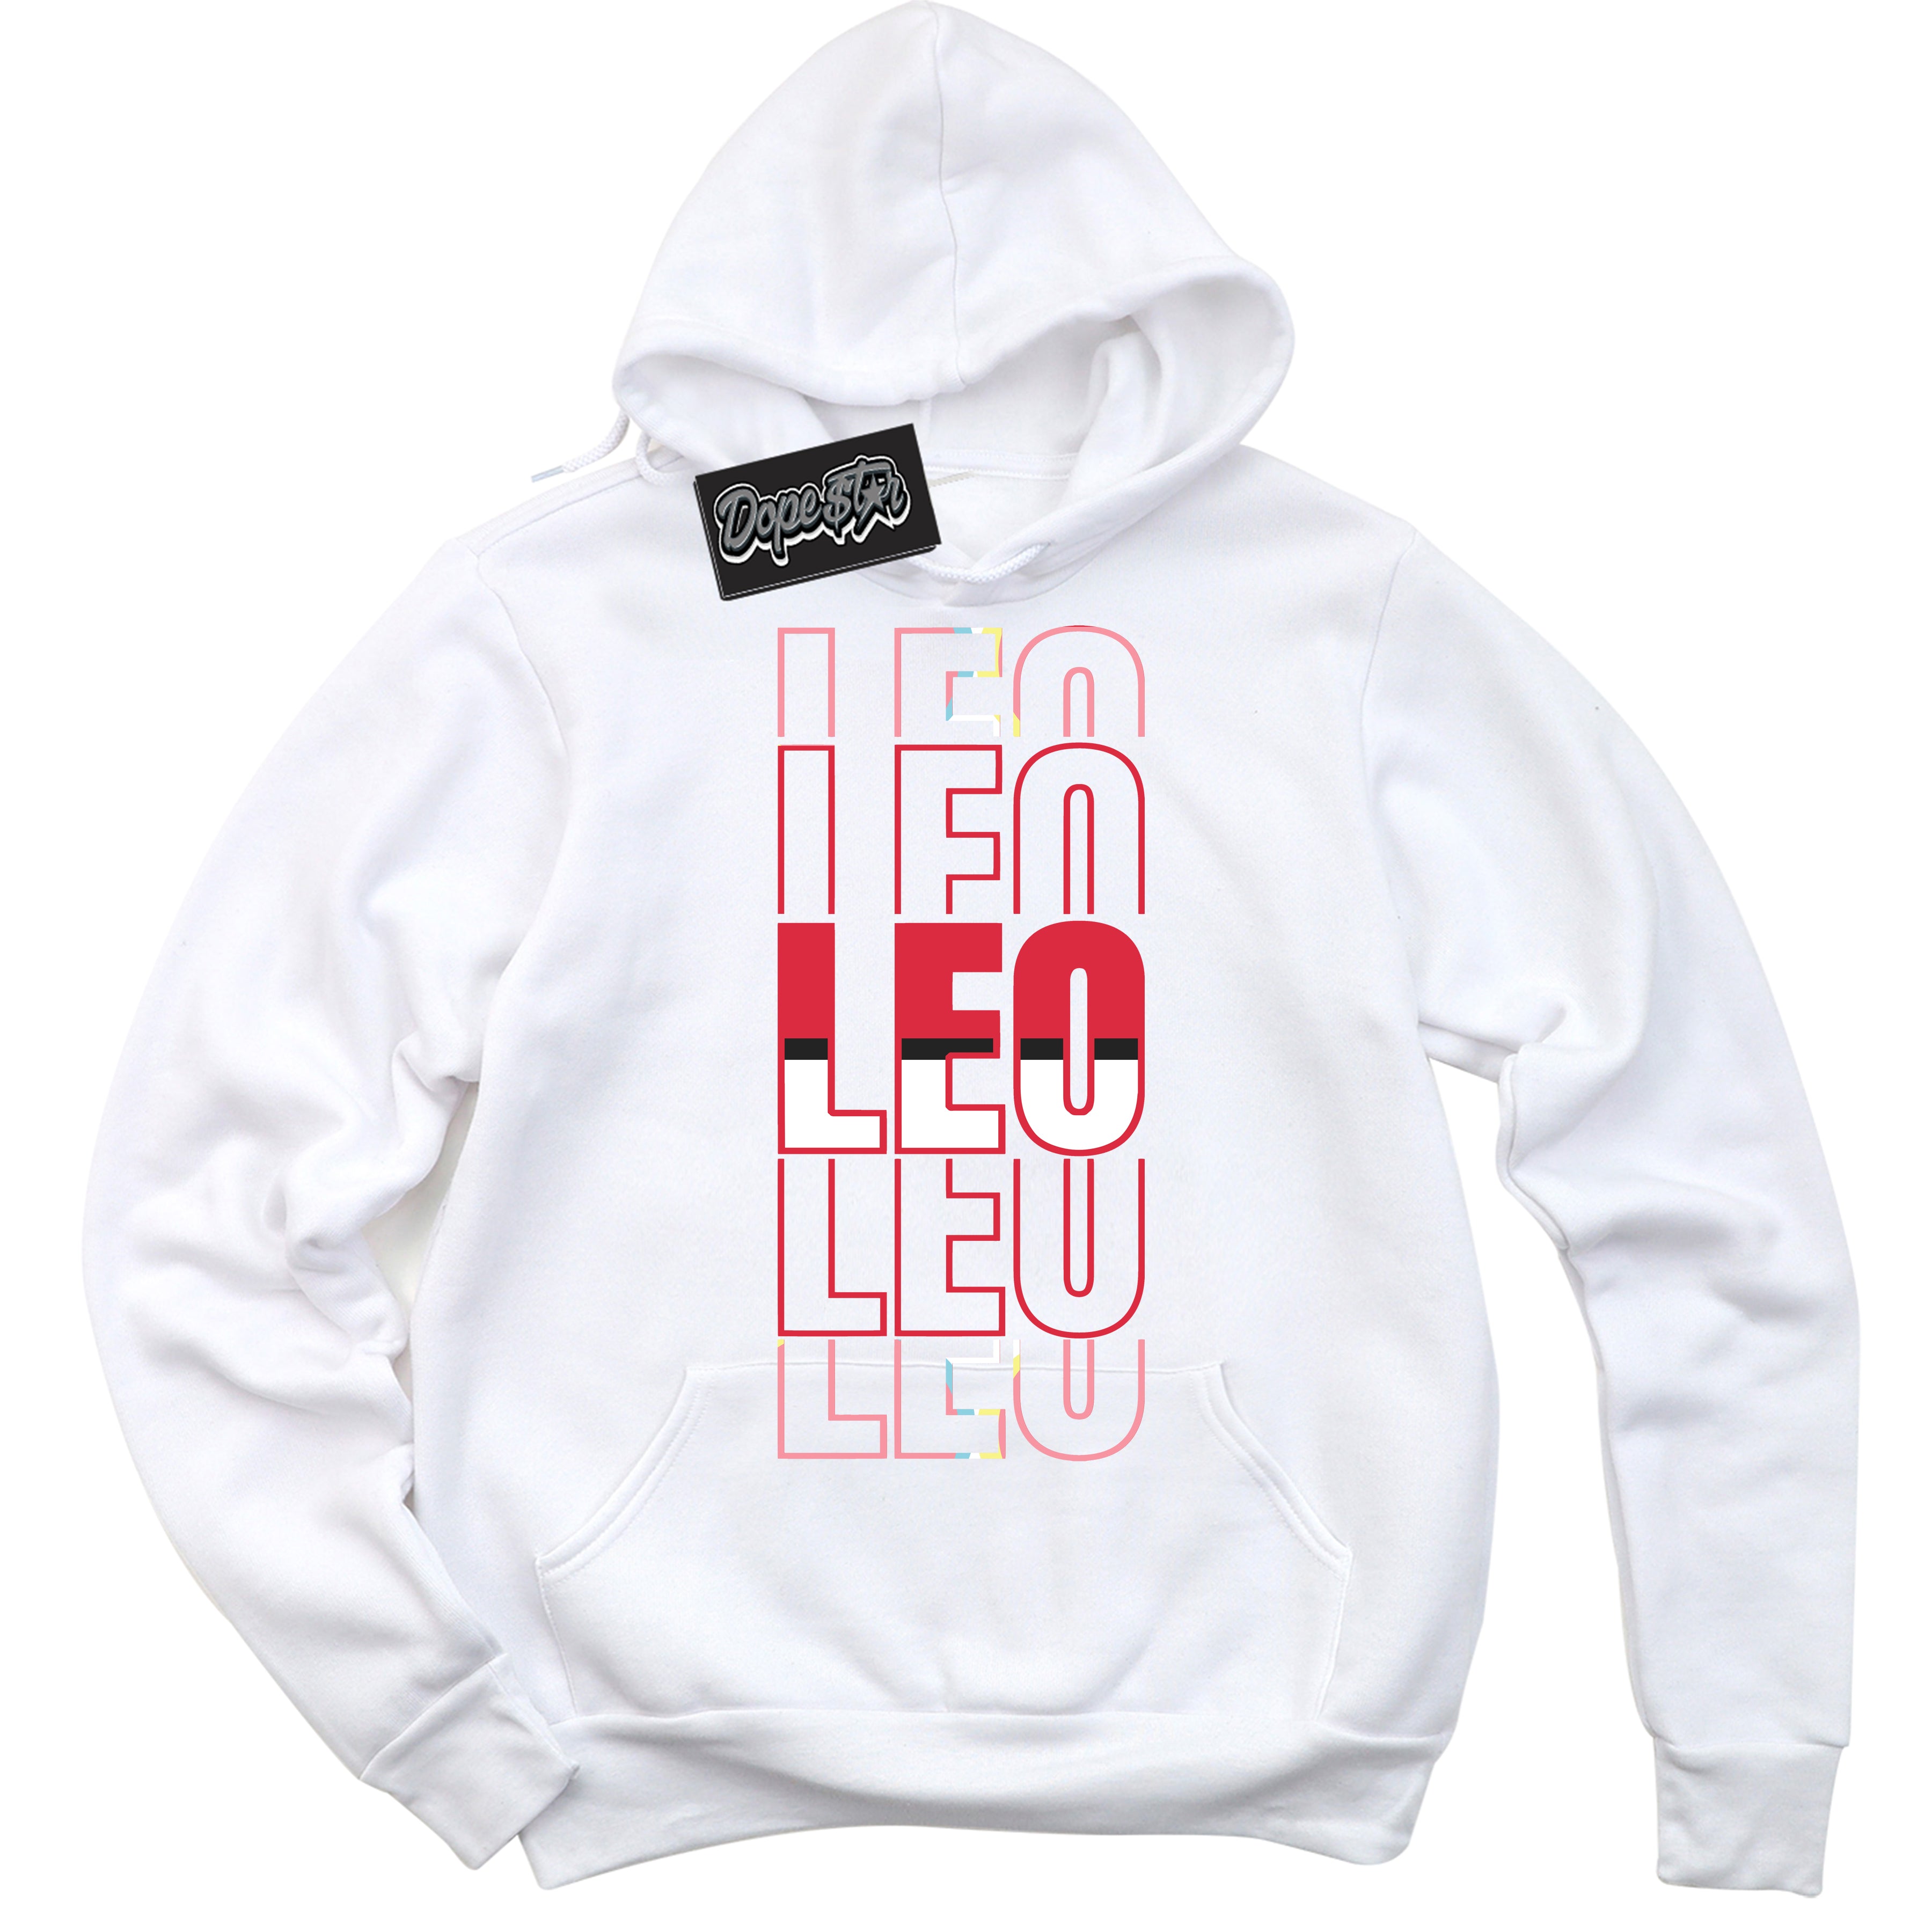 Cool White Graphic DopeStar Hoodie with “ Leo “ print, that perfectly matches Spider-Verse 1s sneakers